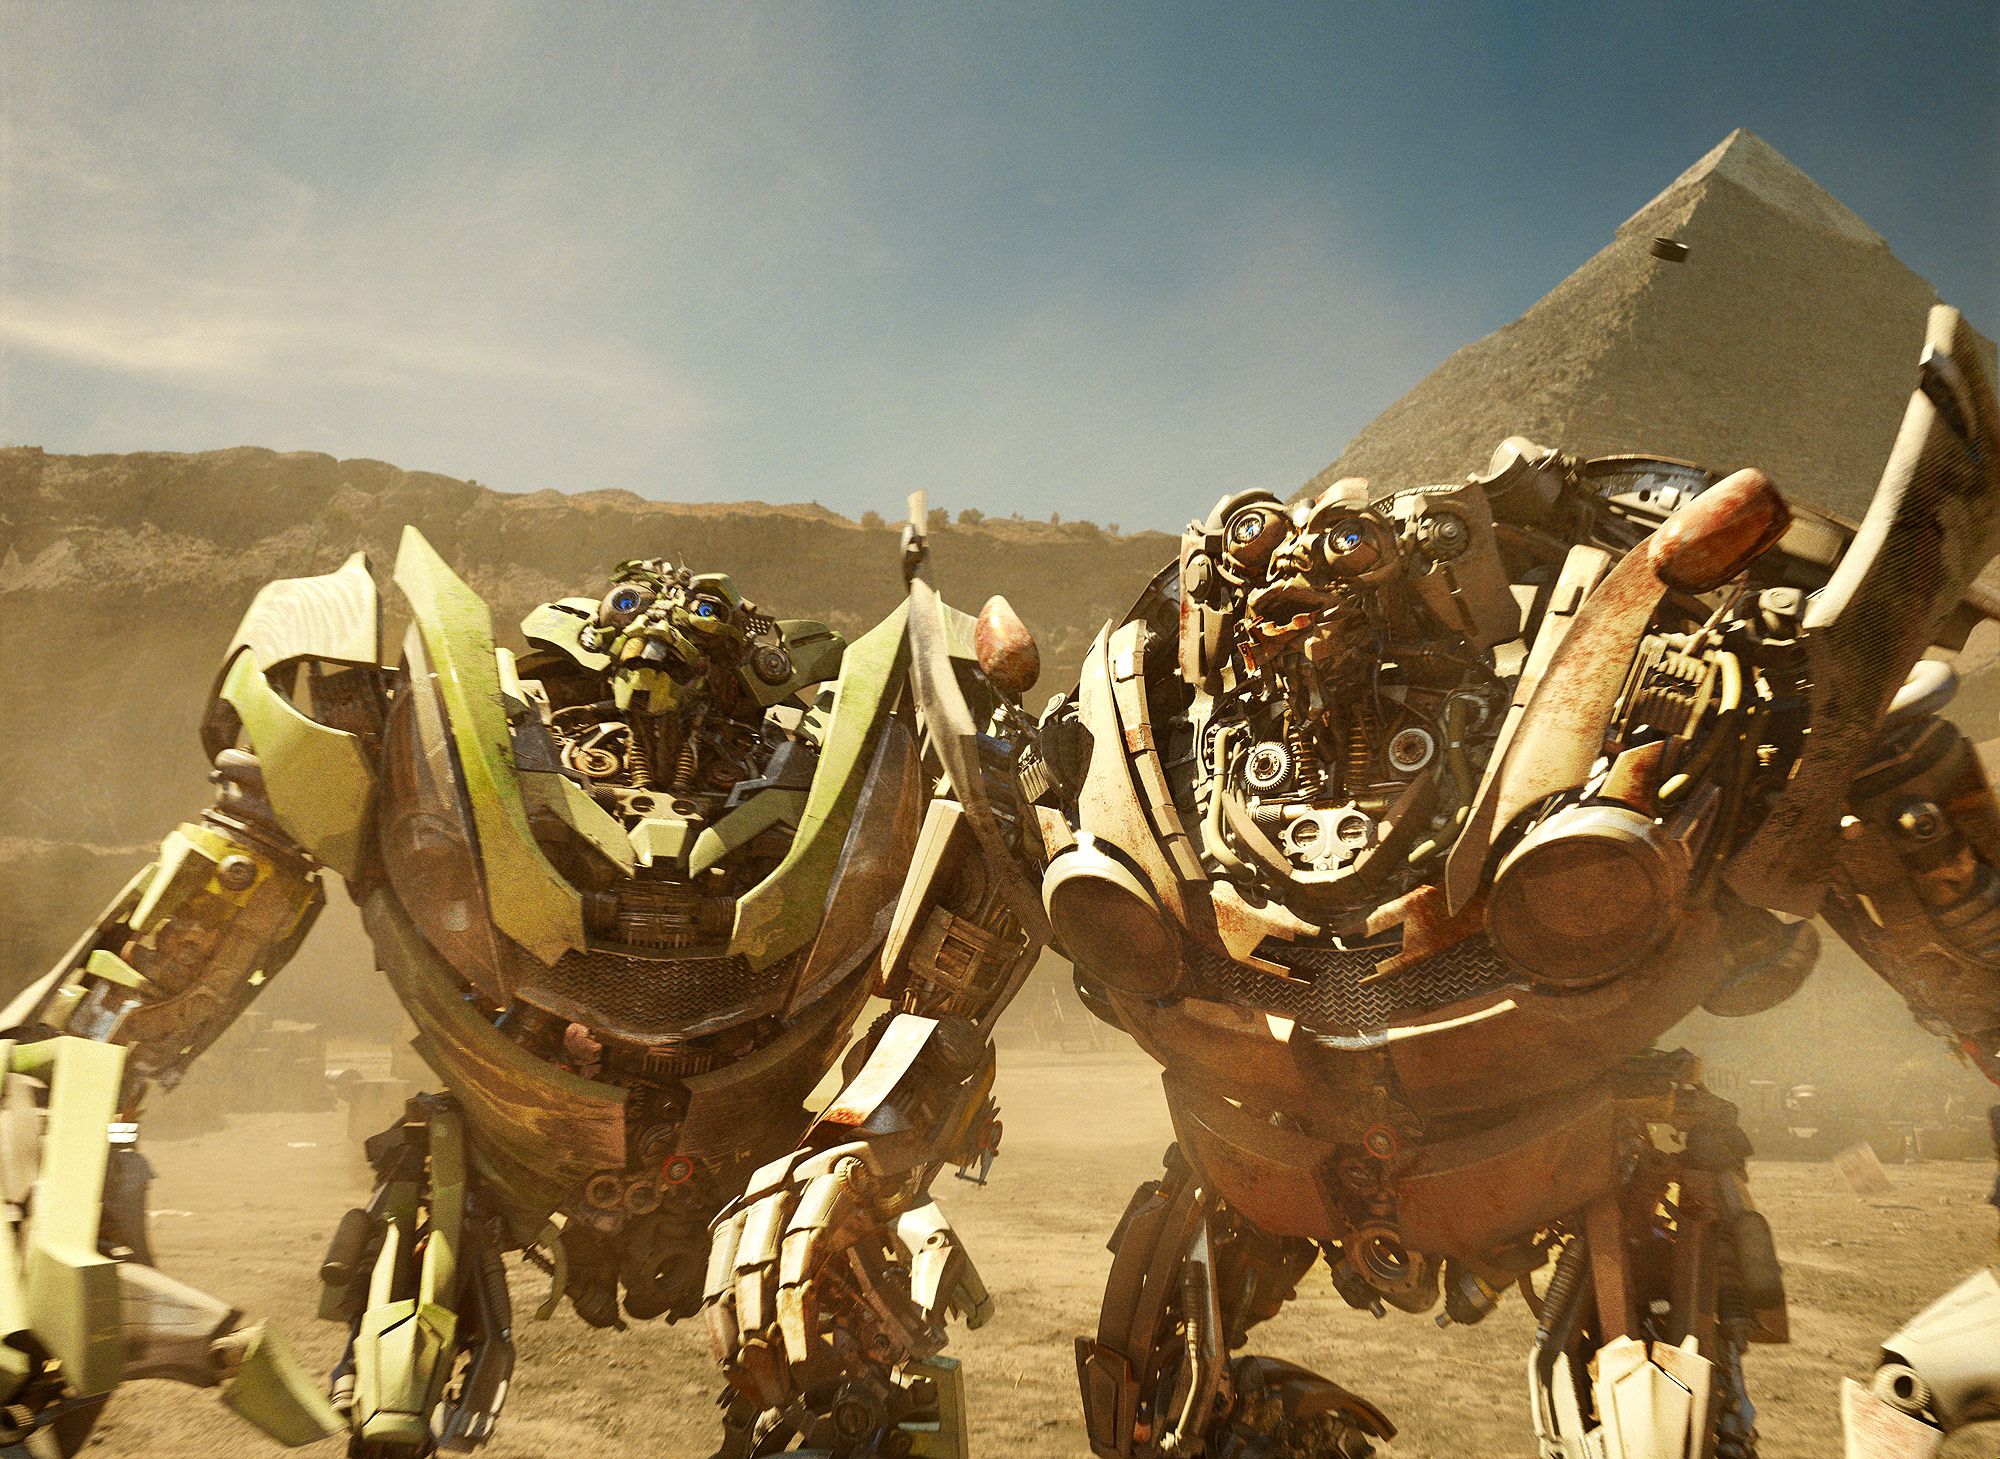 The Twins join the battle in Transformers: Revenge of the Fallen